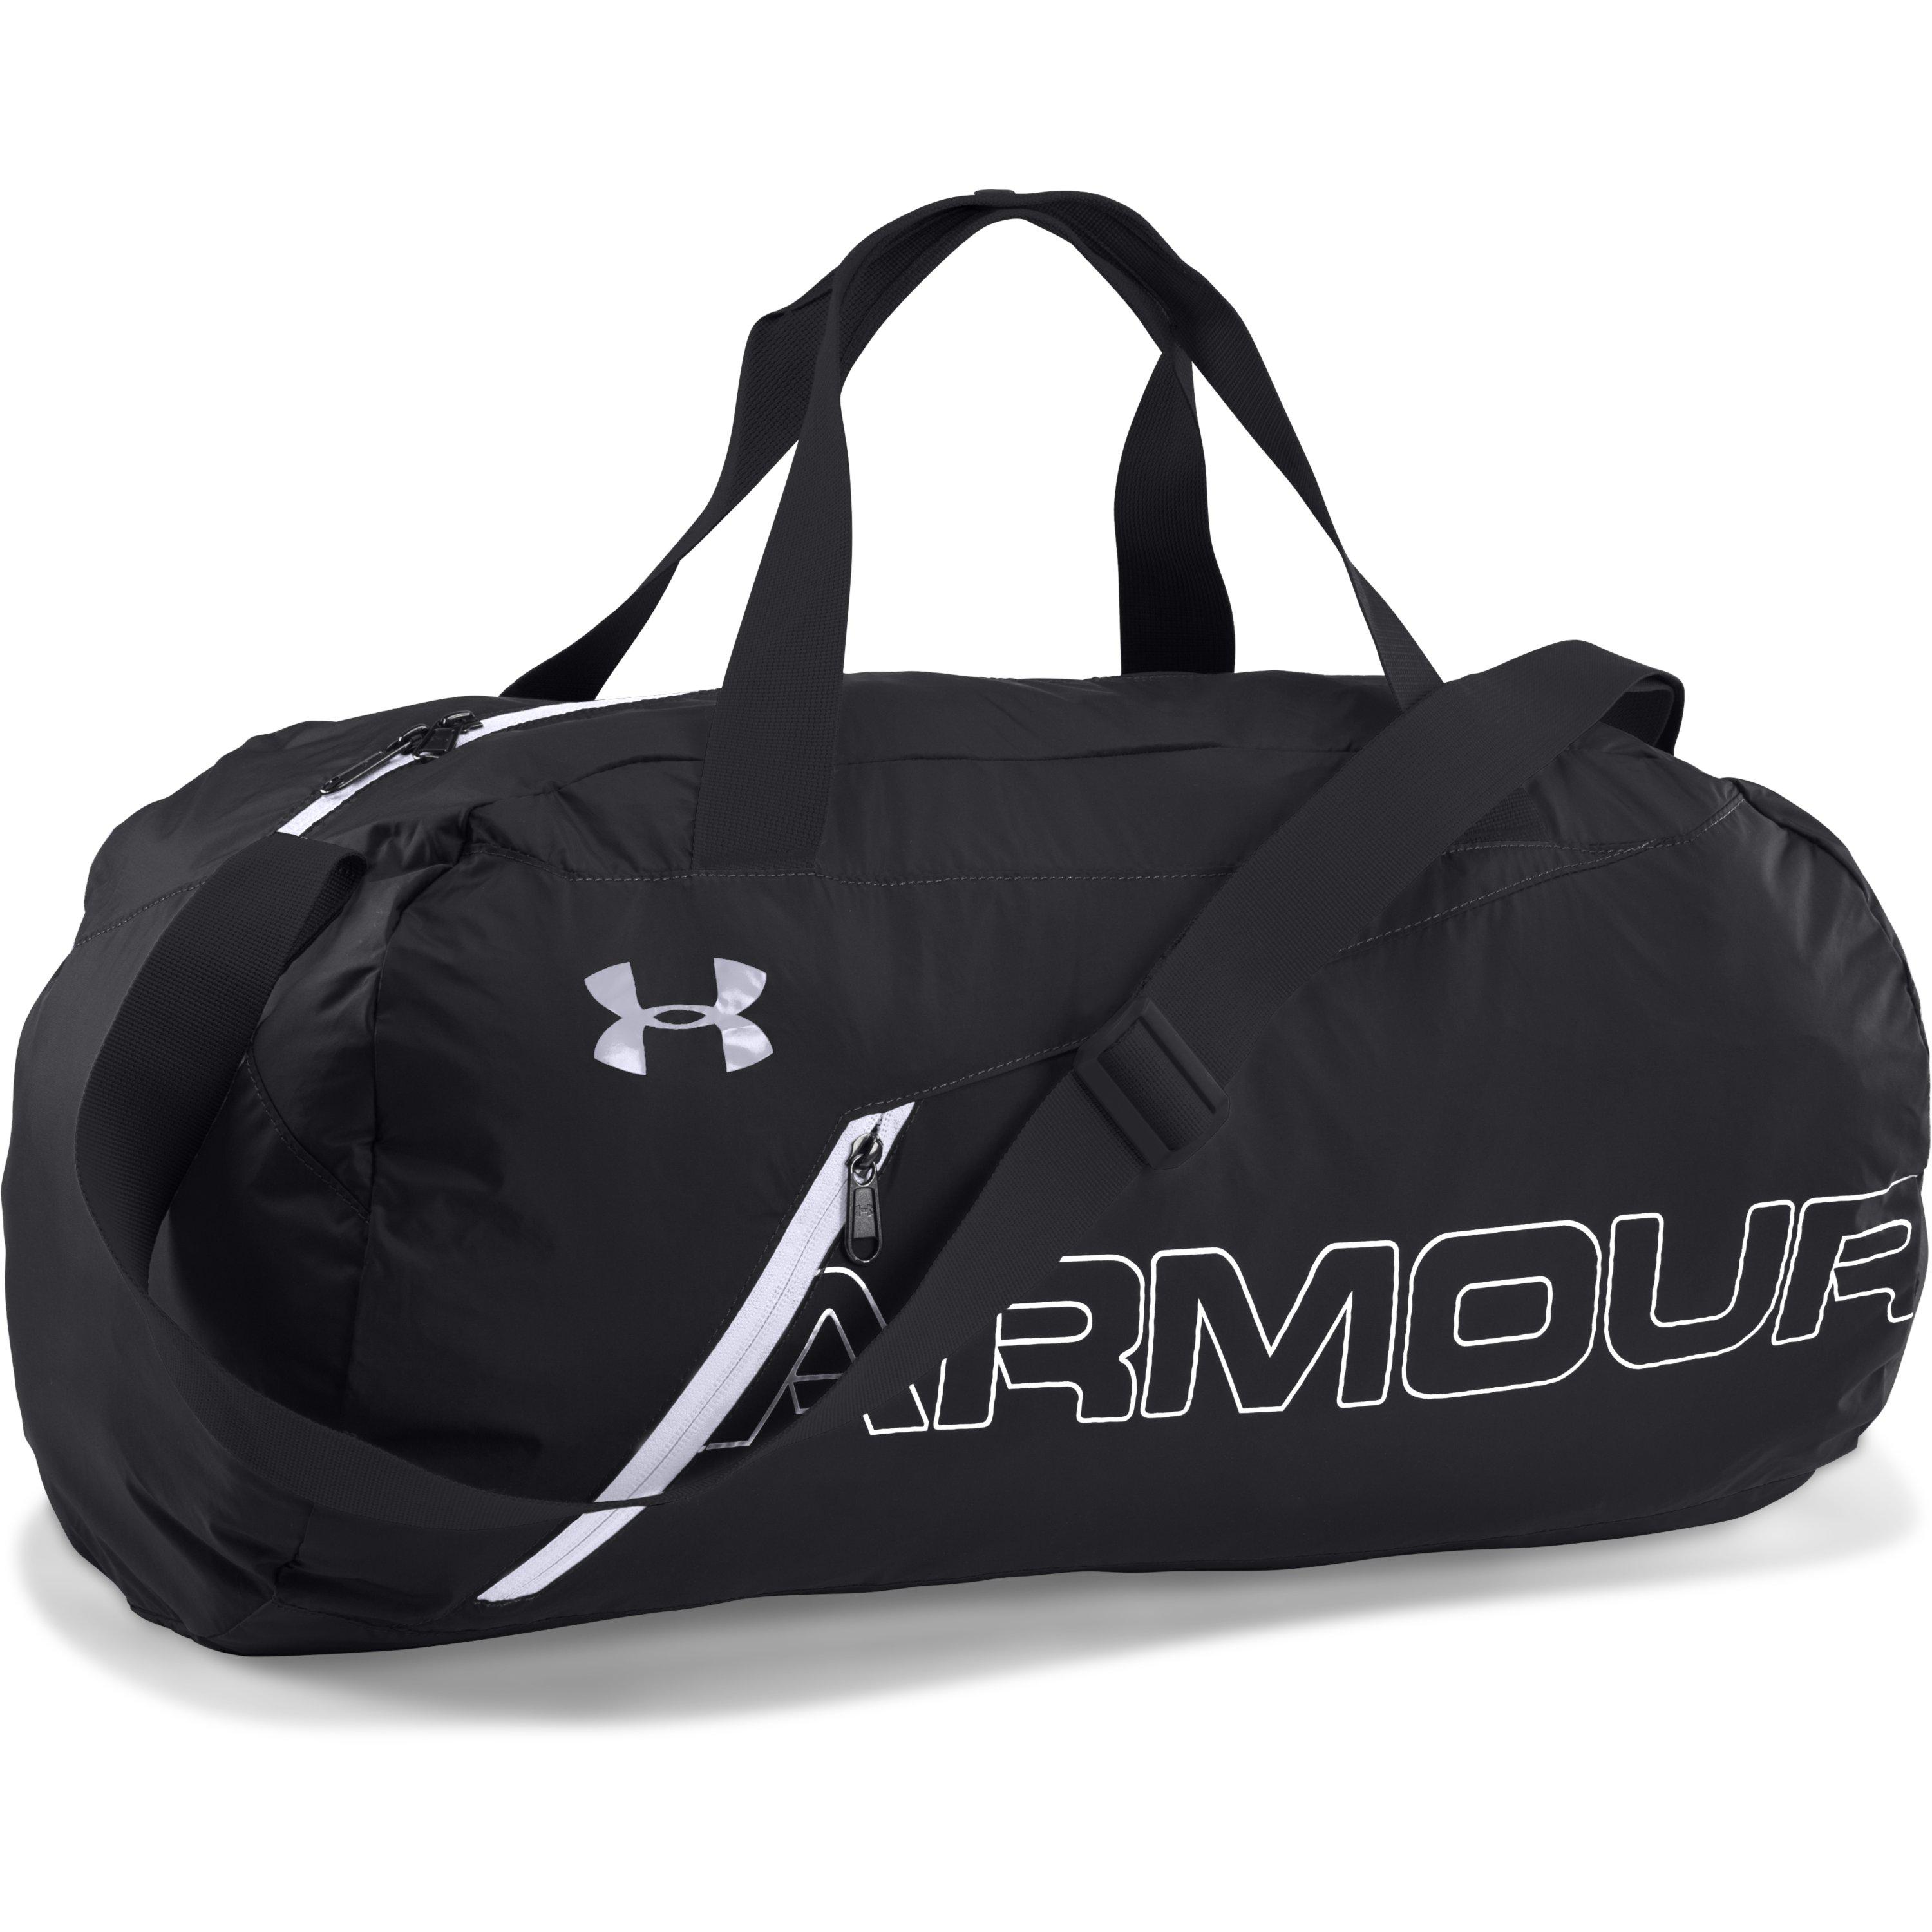 Under Armour Synthetic Ua Packable Duffle Bag in Black /Silver (Black) for Men - Lyst